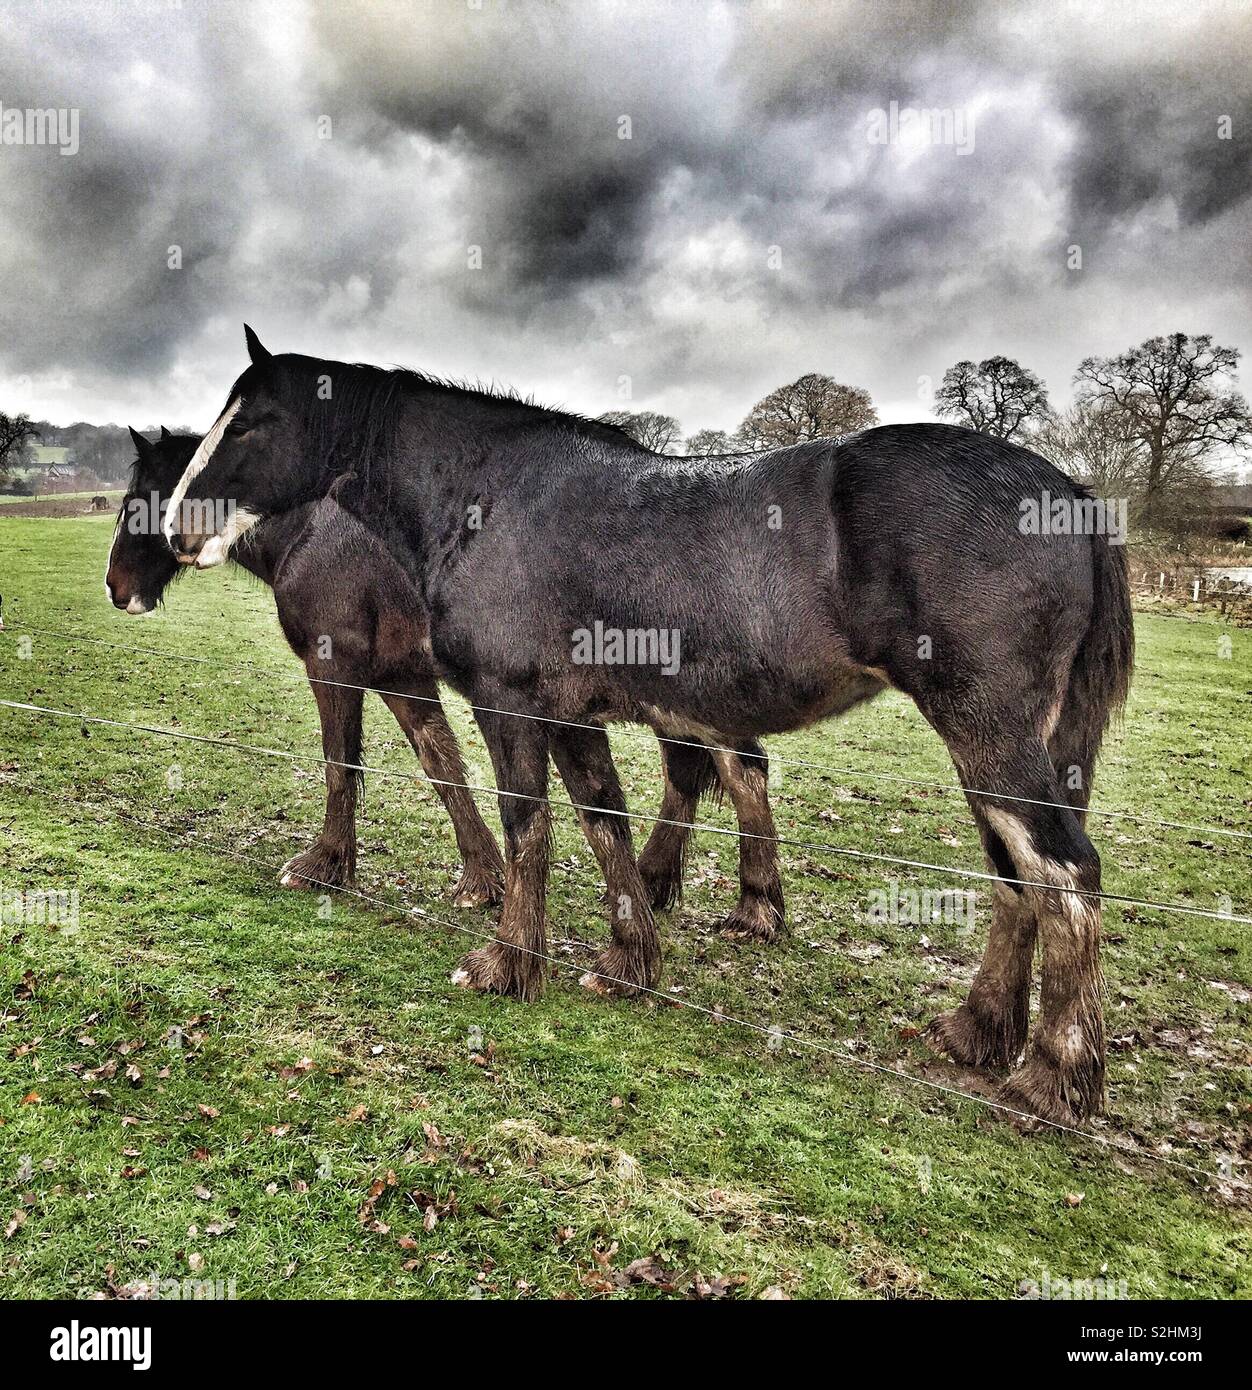 Docile Shire Mares at Cotebrook Shire Horse Centre, Cheshire, England, UK. A British Heavy Draught Horse. Stock Photo